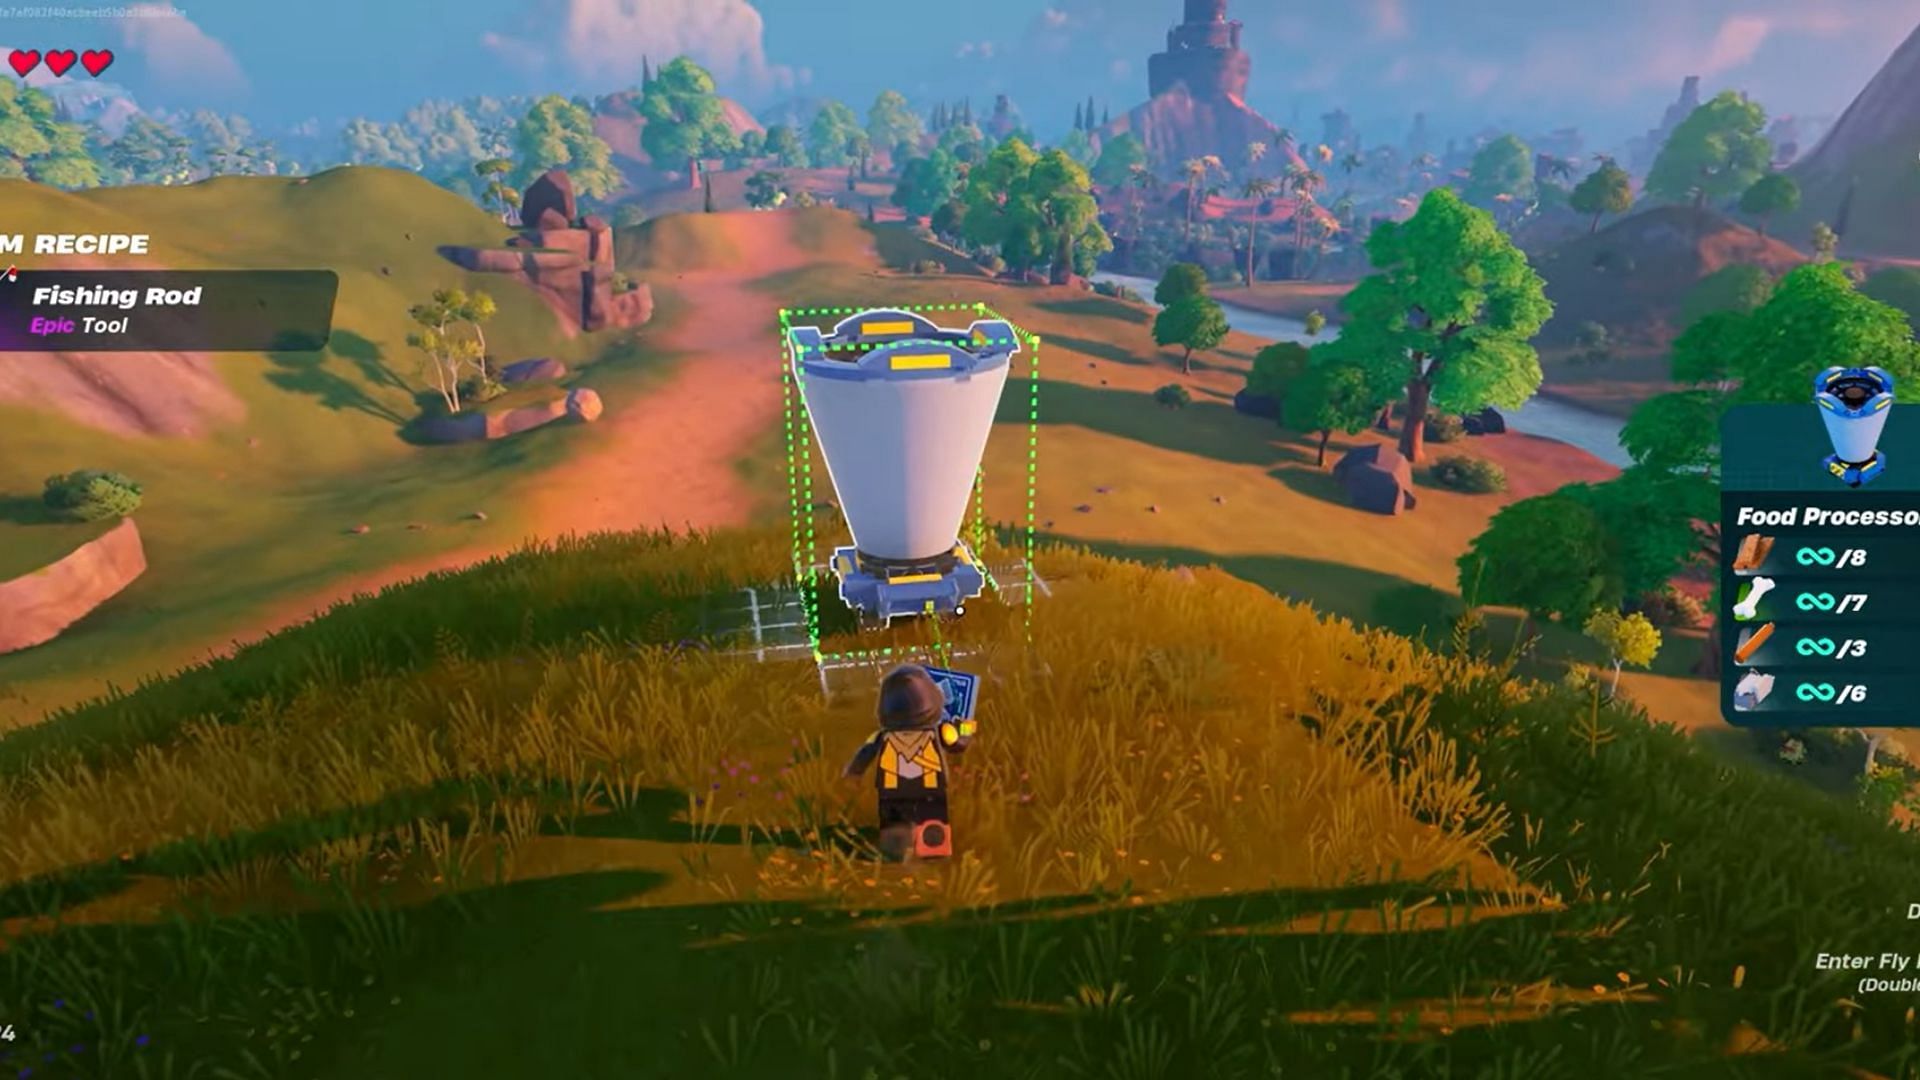 Food Processor (Image via Perfect Score on YouTube and Epic Games)